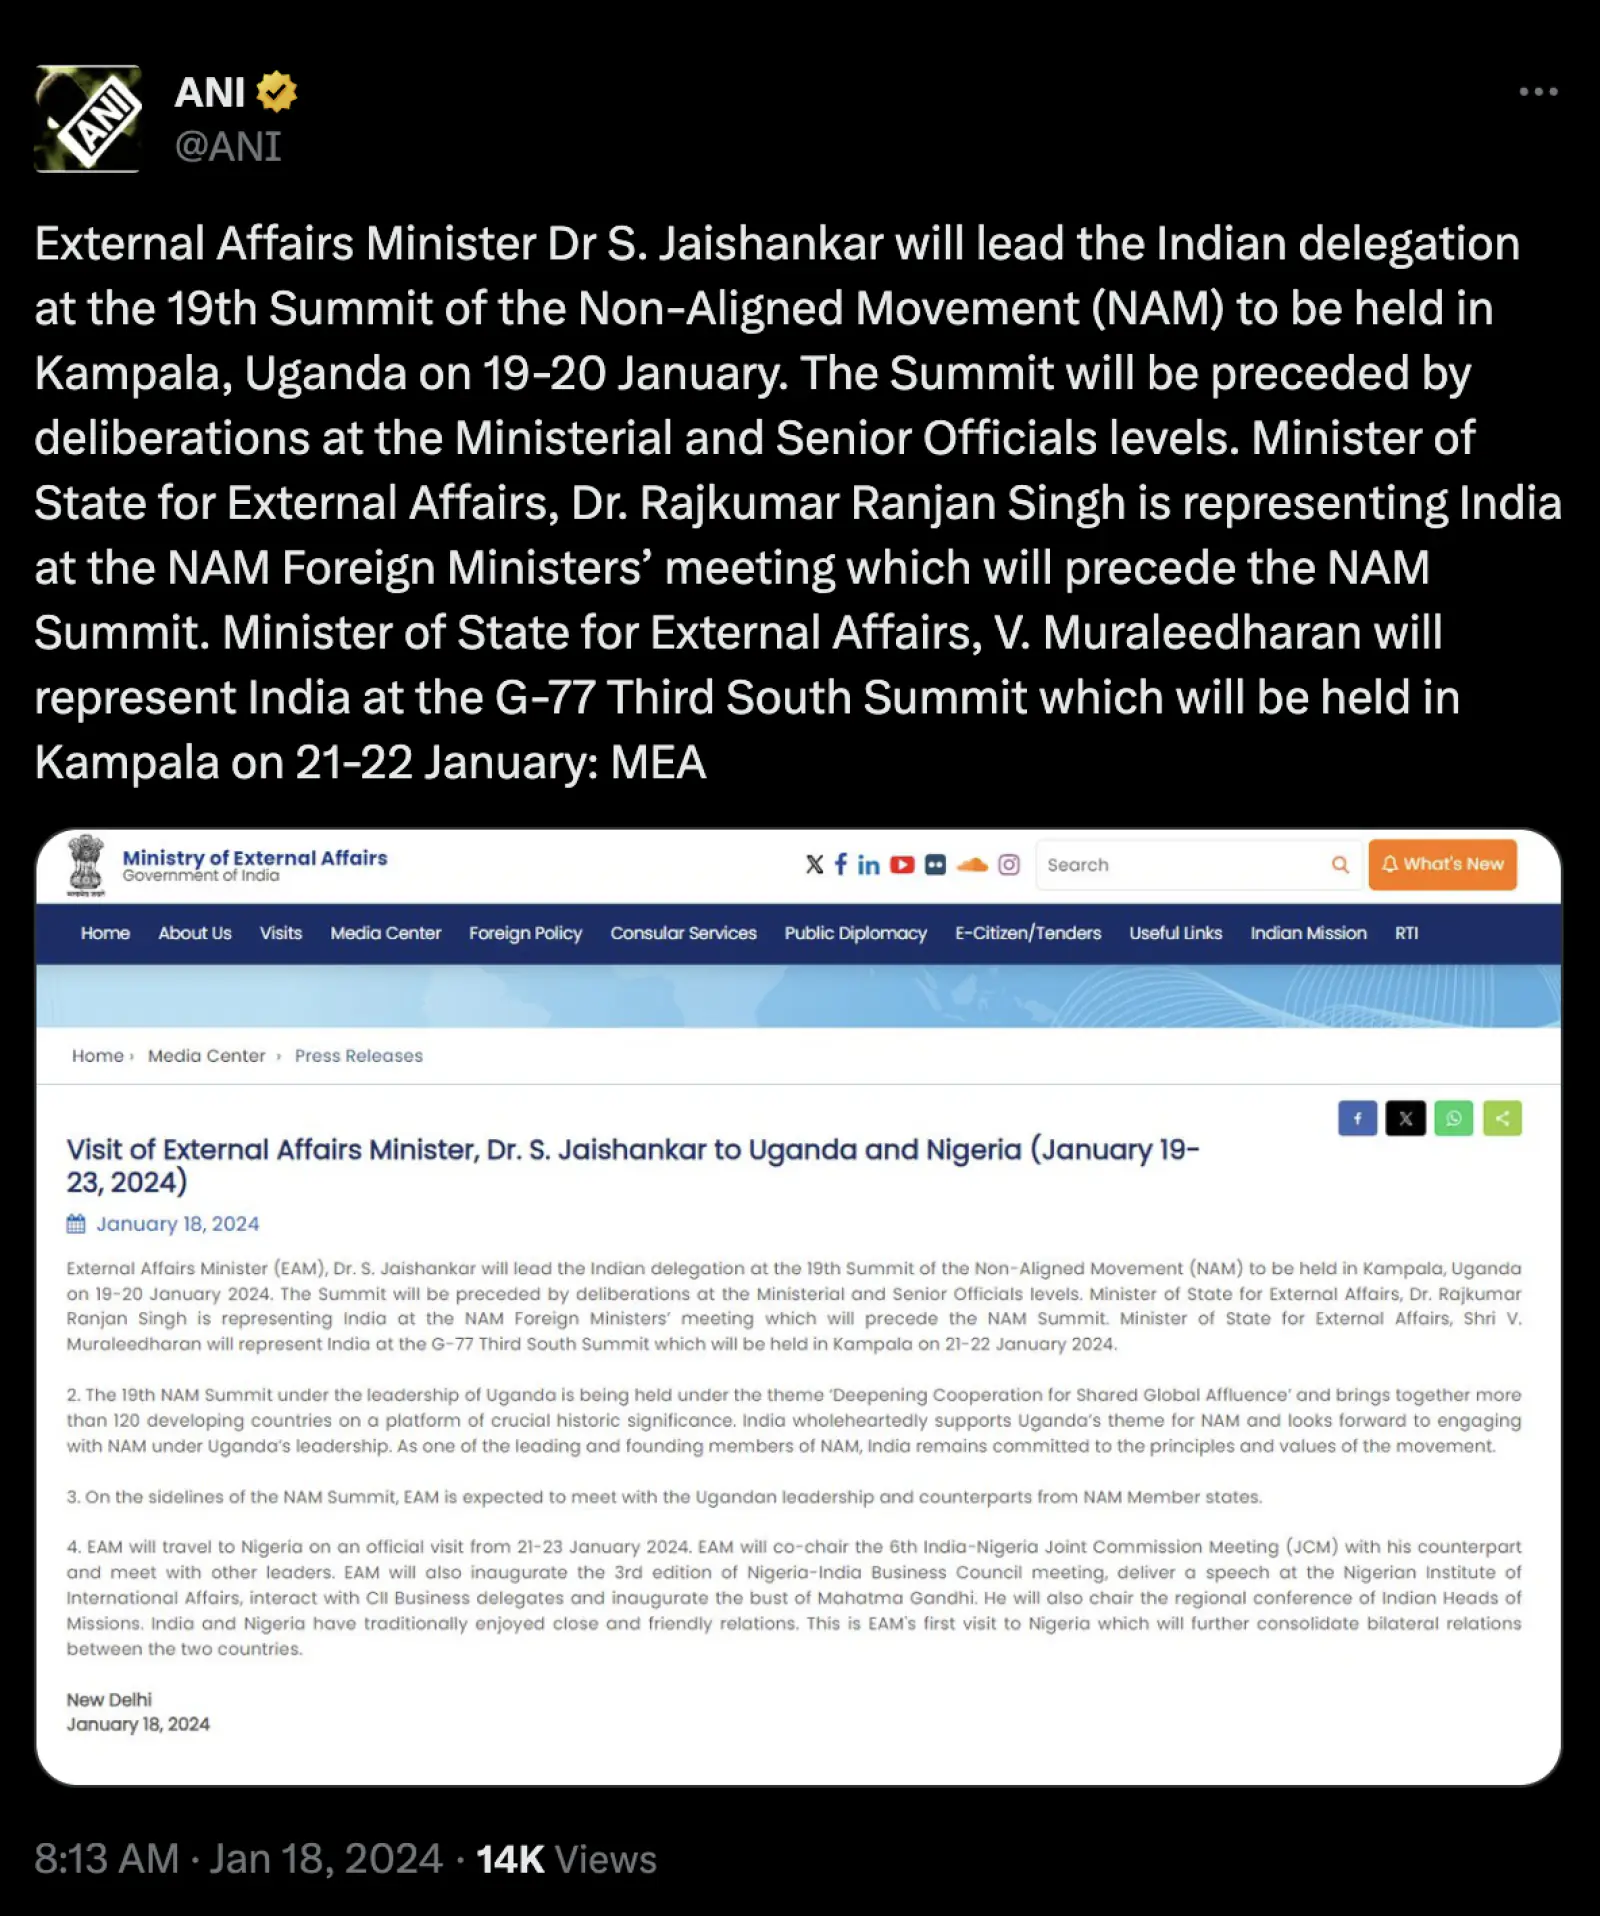 NAM Summit: External Affairs Minister Jaishankar will lead the Indian delegation at the summit in Uganda, to be organized in Kampala